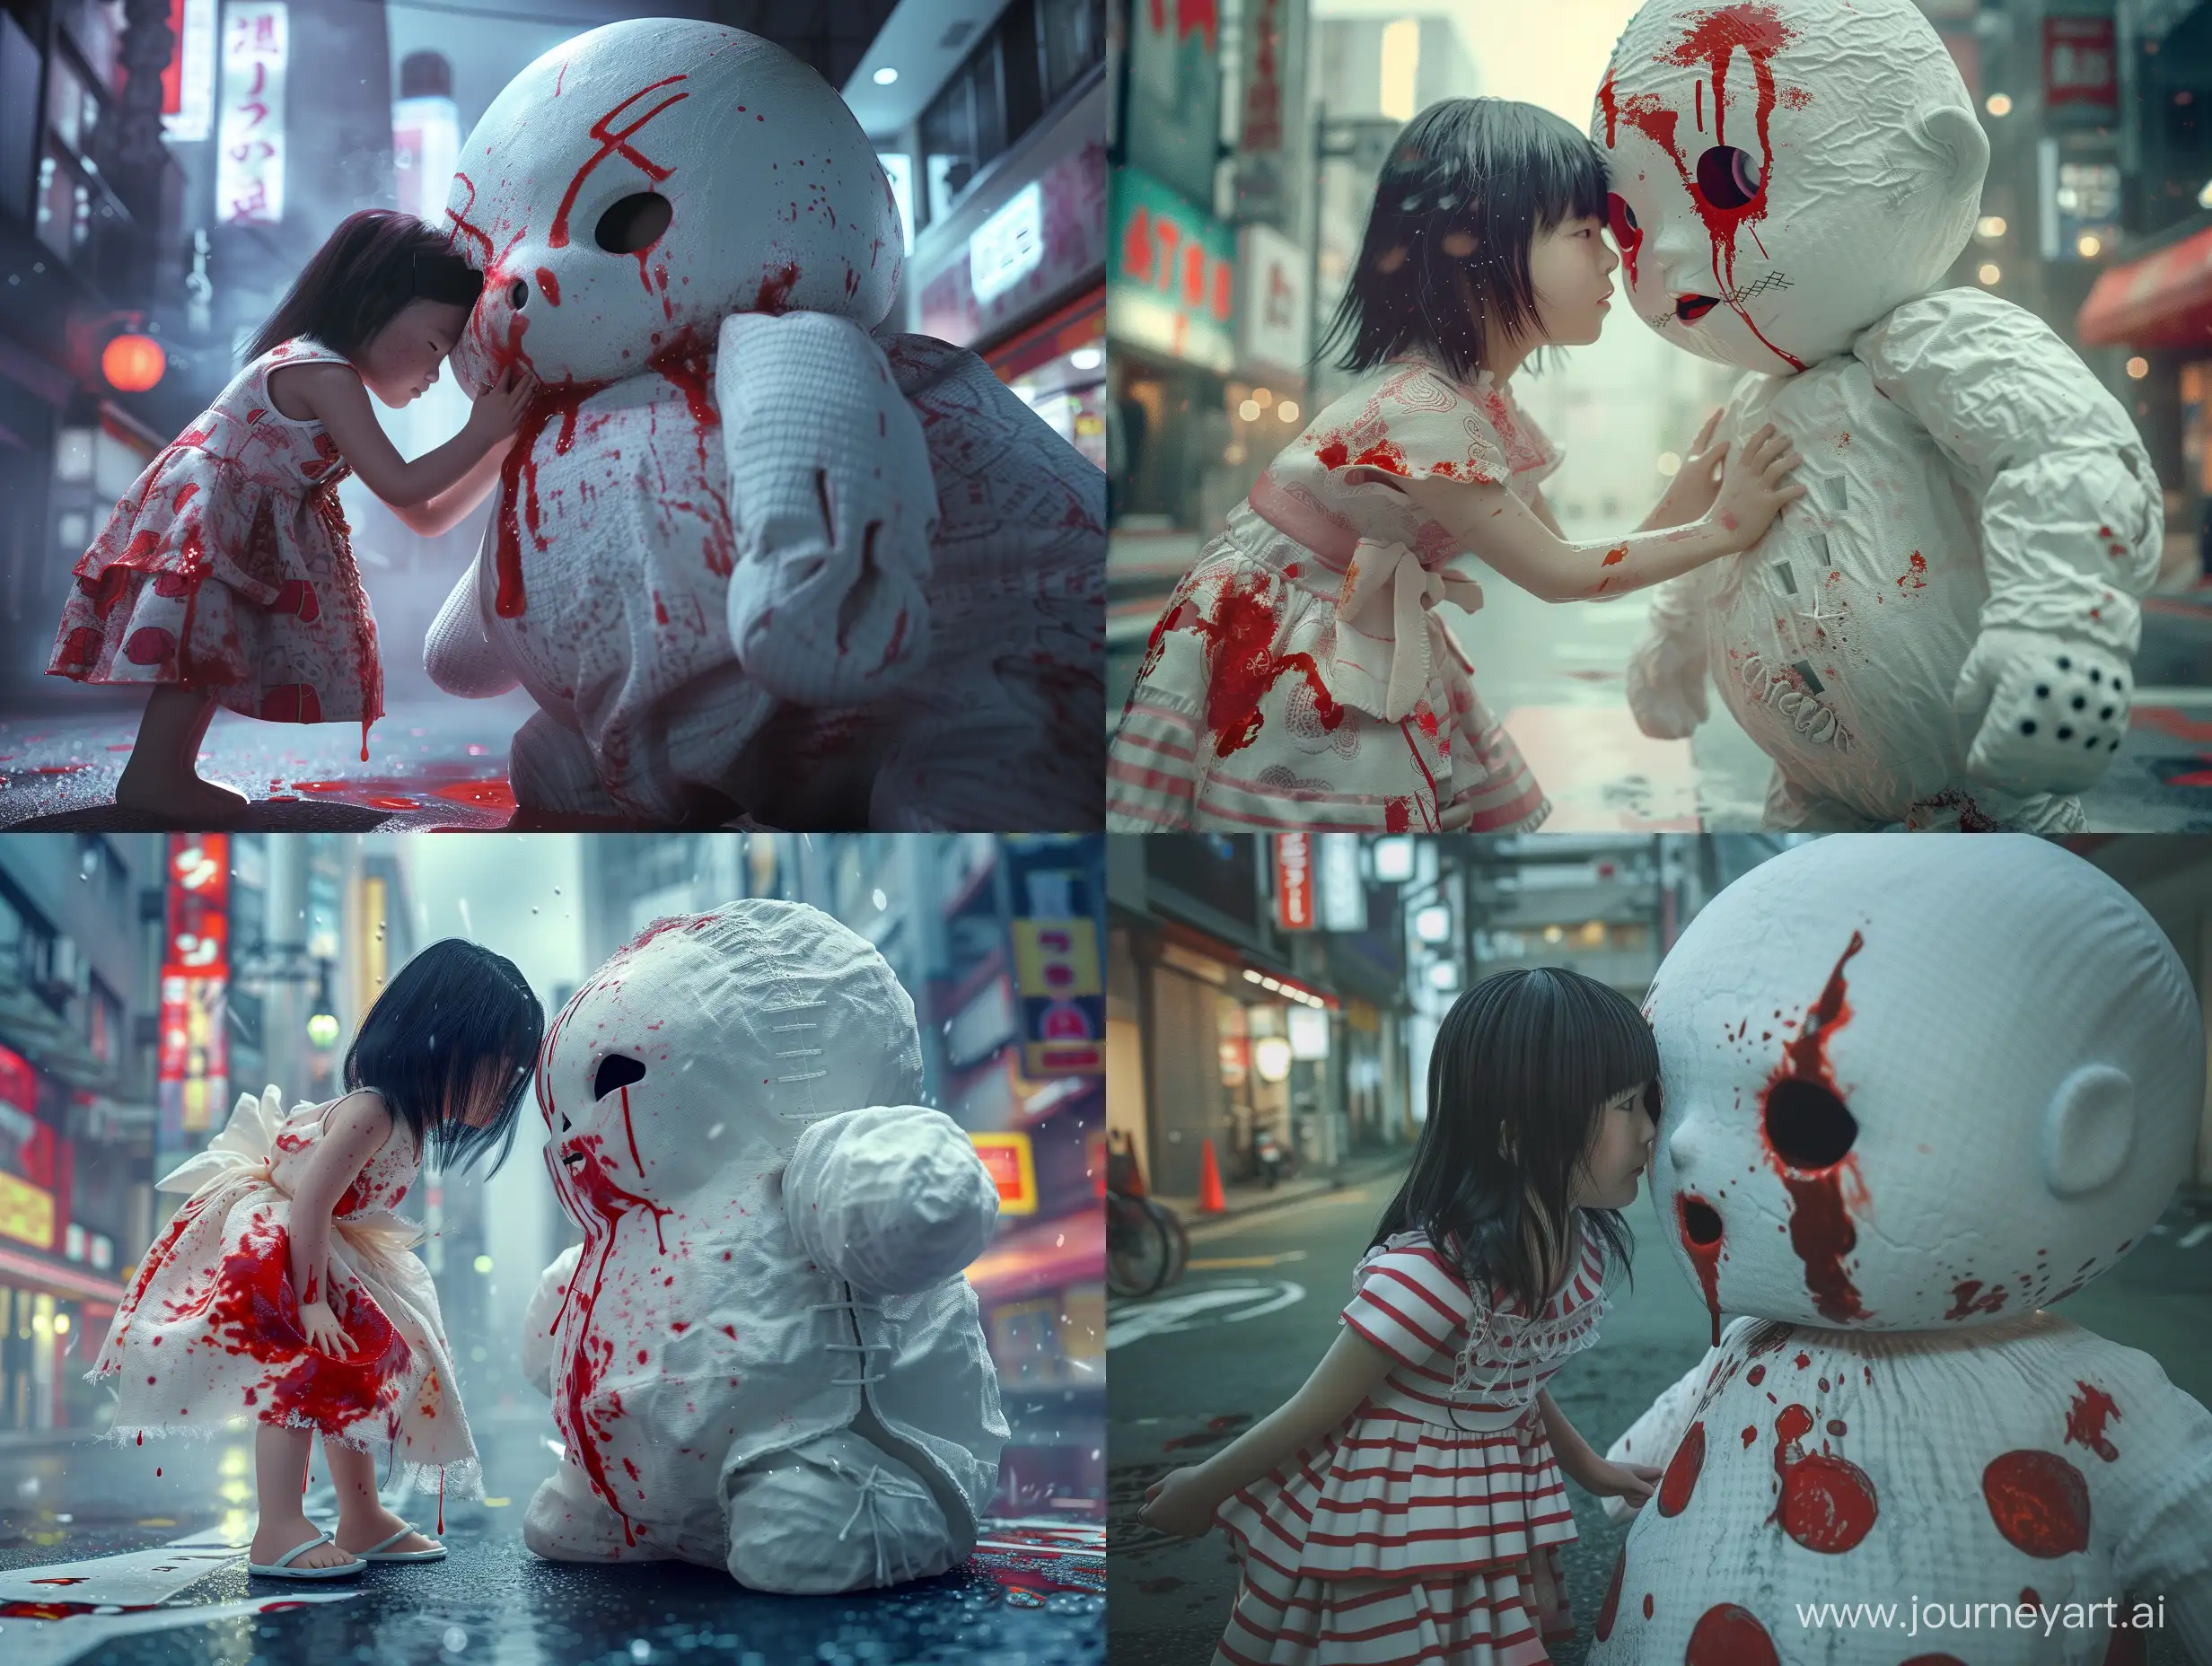 Insidious Chaos, unhinged horror, dark horror, film photography, The little Japanese girl bends close to the giant white rag doll stained with blood, and the two look at each other, The blood on the dress and face, the background is toyko, enhanced by cinematic lighting and composition effect. The vibrant scenes draw inspiration from Takashi Miike's aesthetic, adding a captivating allure, Created using the Octane rendering software at a remarkable 8K resolution, this artwork seamlessly combines the realms of beauty and technology.cinematic, dramatic, expired 35mm film